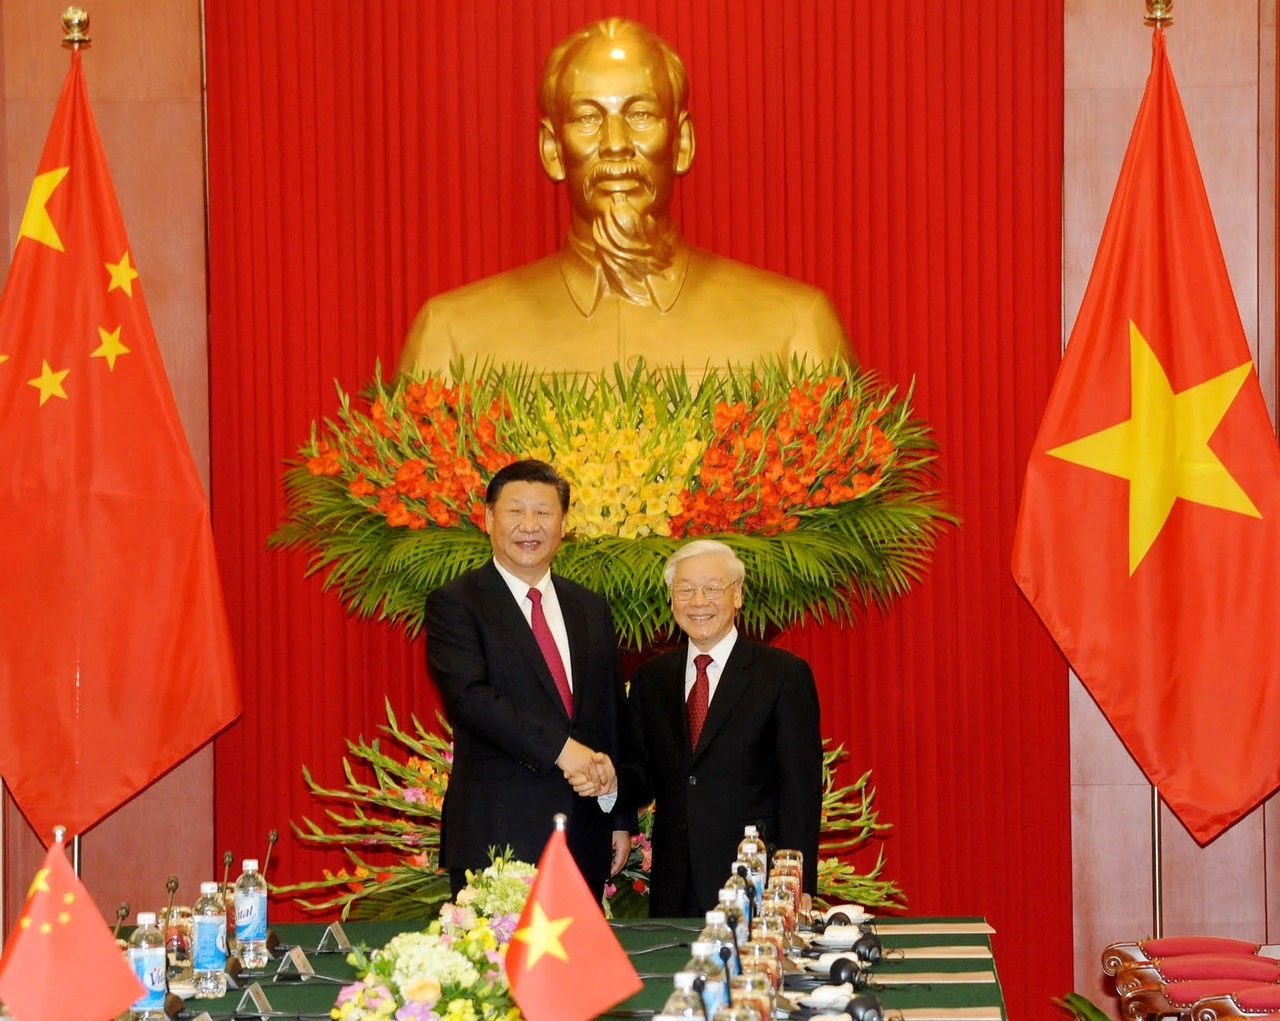 Party General Secretary Nguyen Phu Trong welcomes and holds talks with General Secretary and President of China Xi Jinping during his State visit to Vietnam in 2017.